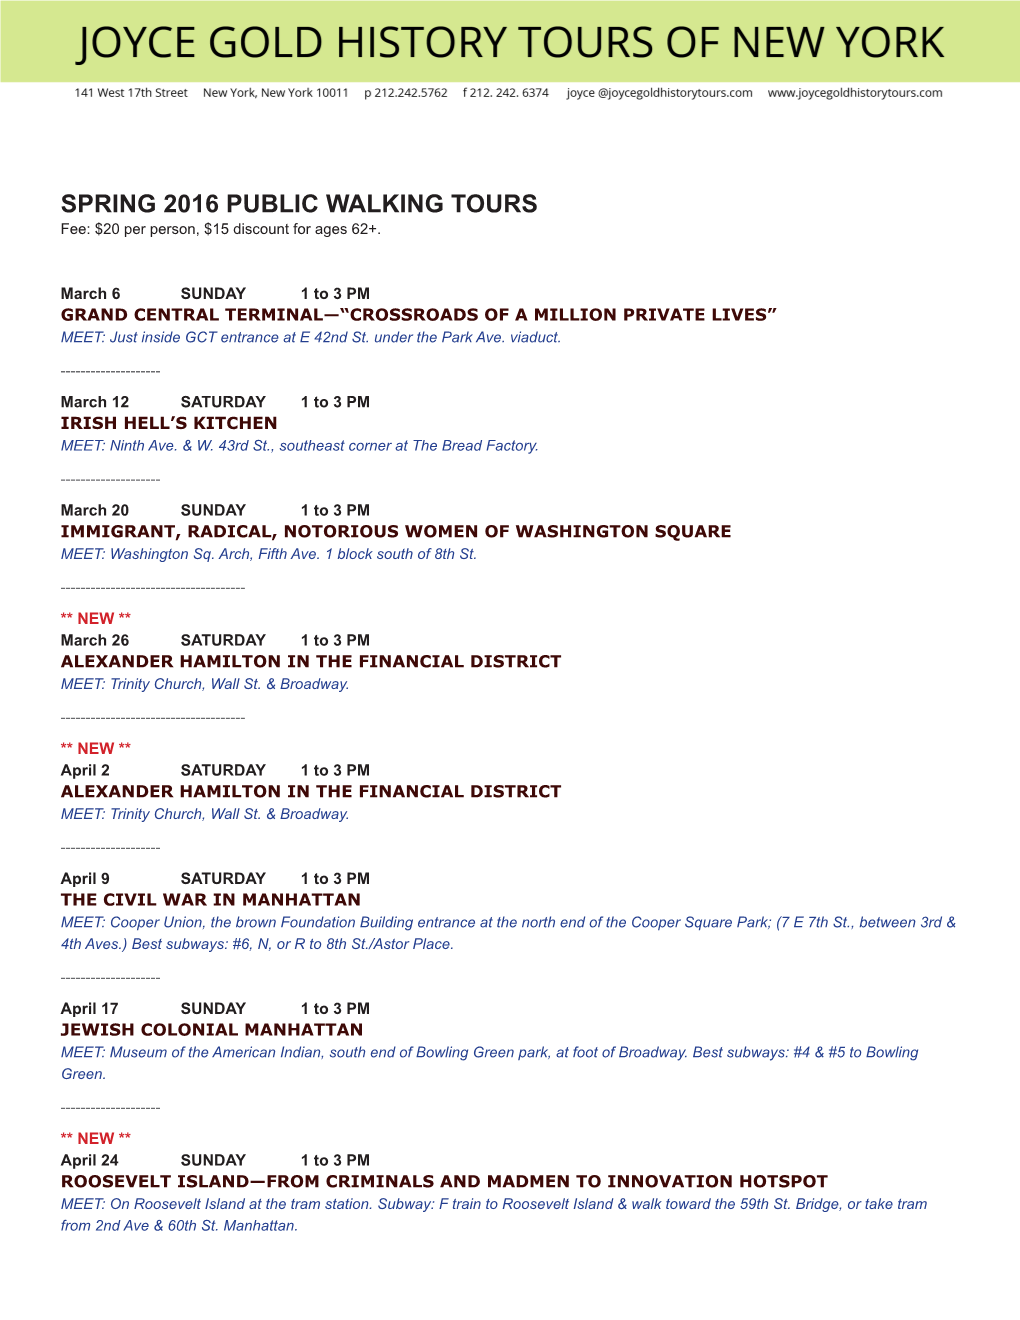 SPRING 2016 PUBLIC WALKING TOURS Fee: $20 Per Person, $15 Discount for Ages 62+